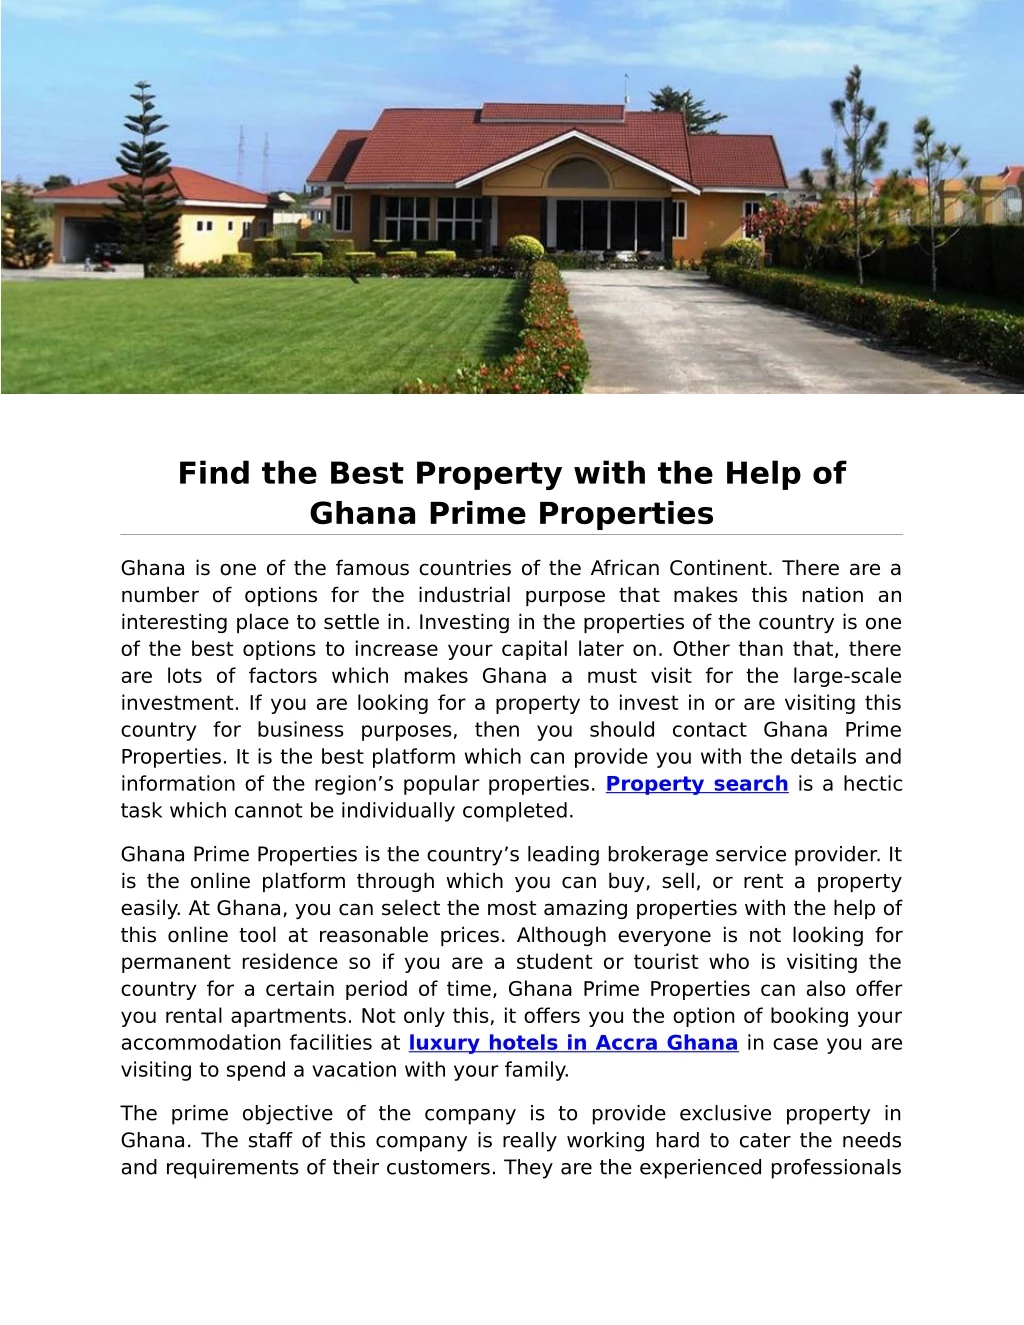 find the best property with the help of ghana